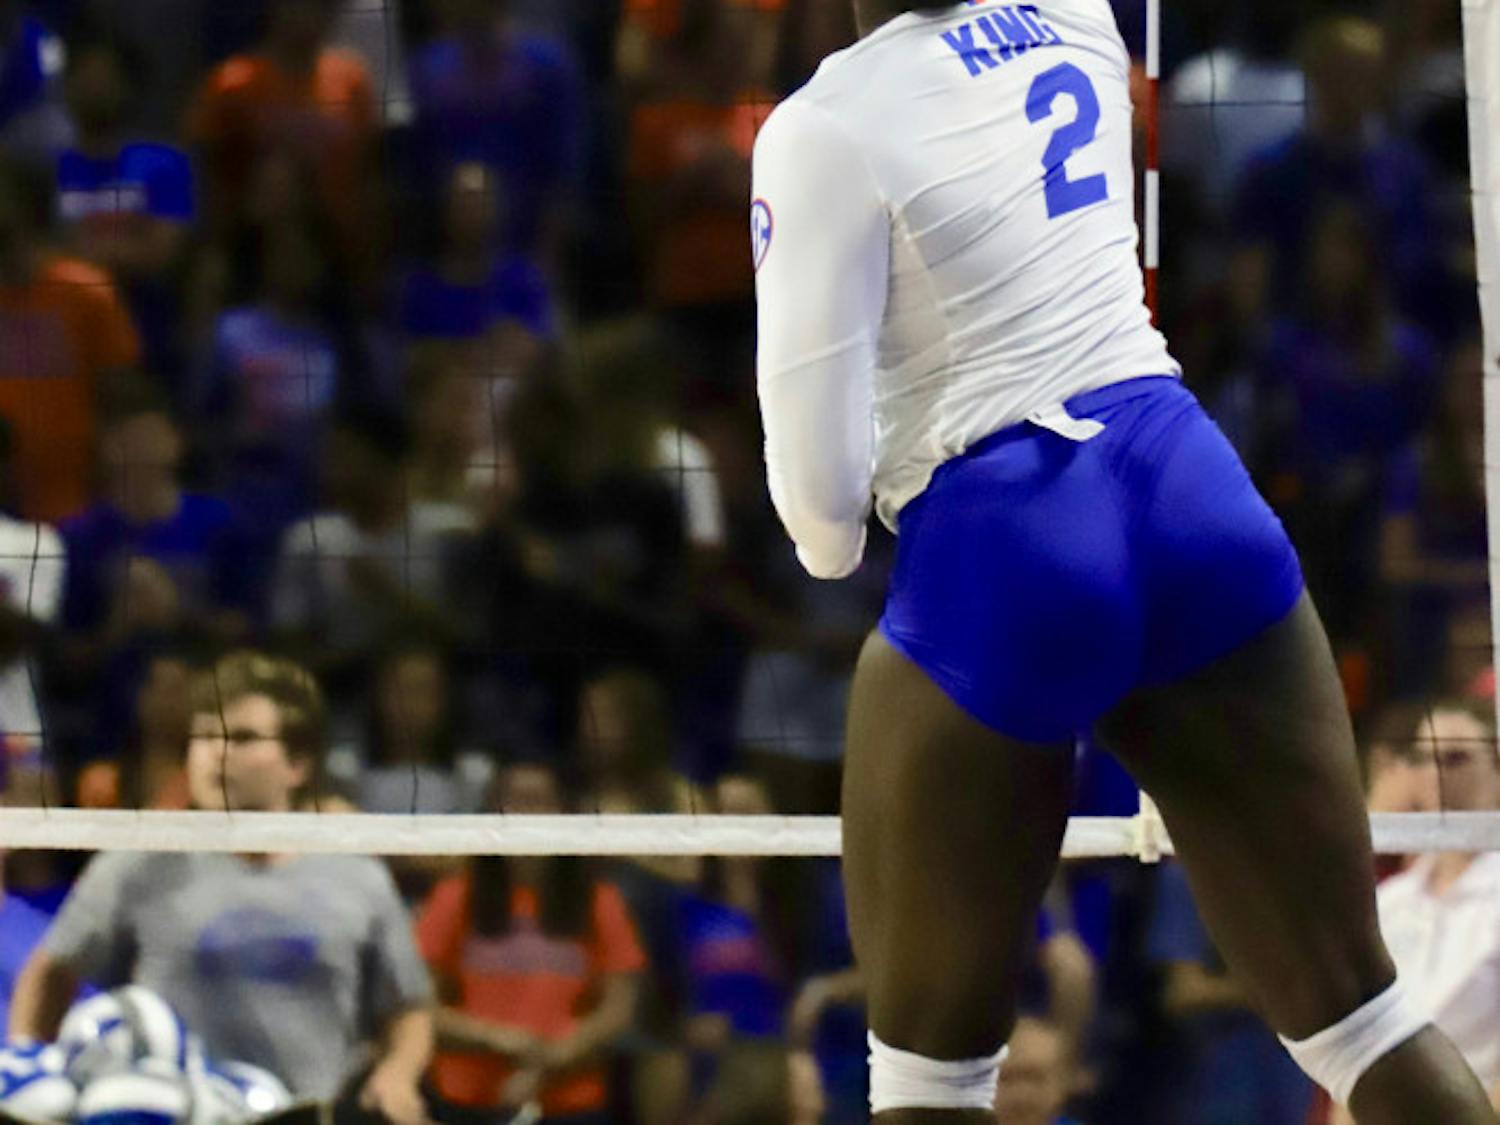 Redshirt junior middle blocker Darrielle King played an integral role in Florida’s sweep weekend at home against South Florida, James Madison and Long Beach State. The 6-foot-3 attacker notched a career-high 15 kills against the Beach and tallied 25 on the weekend. She will be one of Florida’s key players when the team takes on the Seminoles at 6 p.m. on Tuesday. 